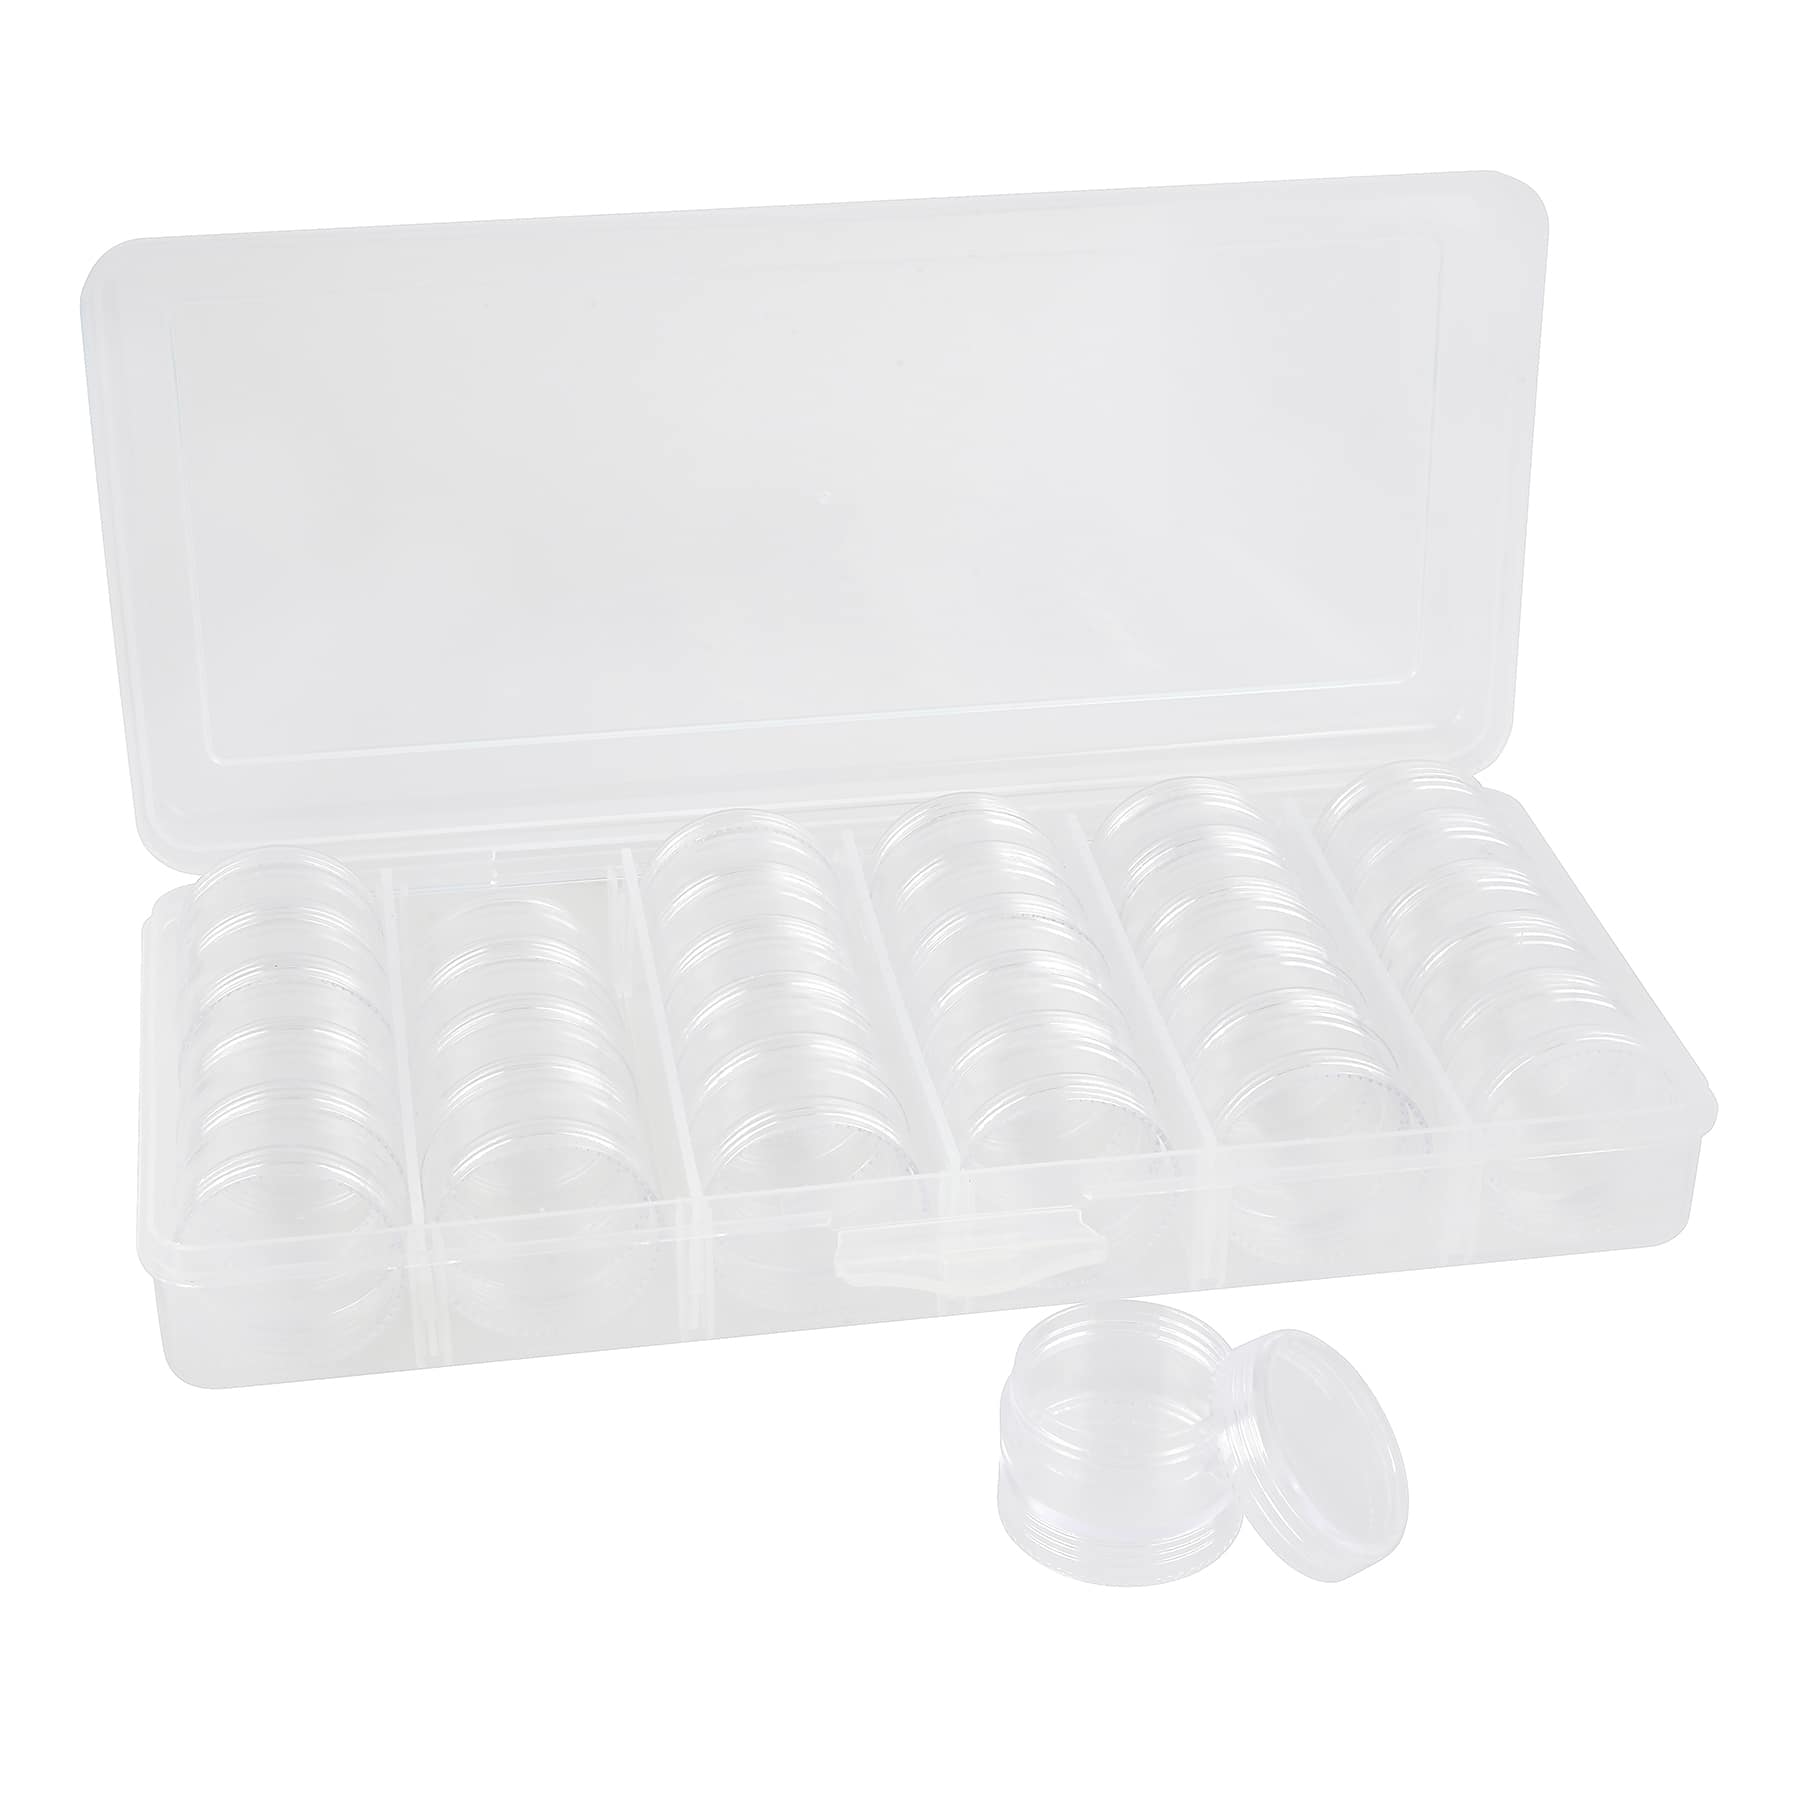 Buy in Bulk - 12 Pack: Bead Storage Box with 6 Container Stacks by